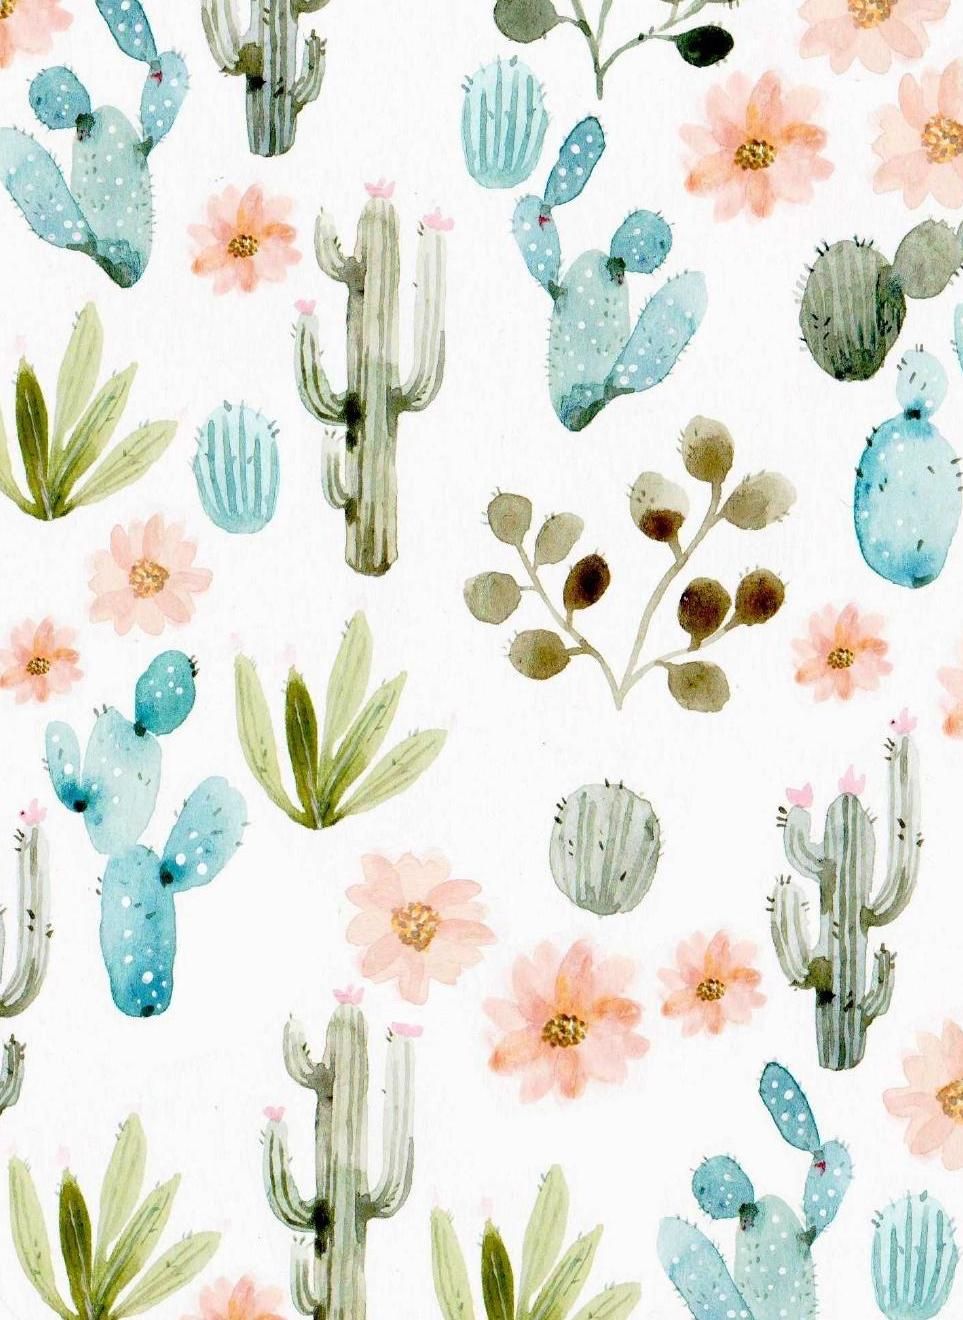 Cute Cactus Wallpapers Background Cute Cactus Pictures Background Image  And Wallpaper for Free Download